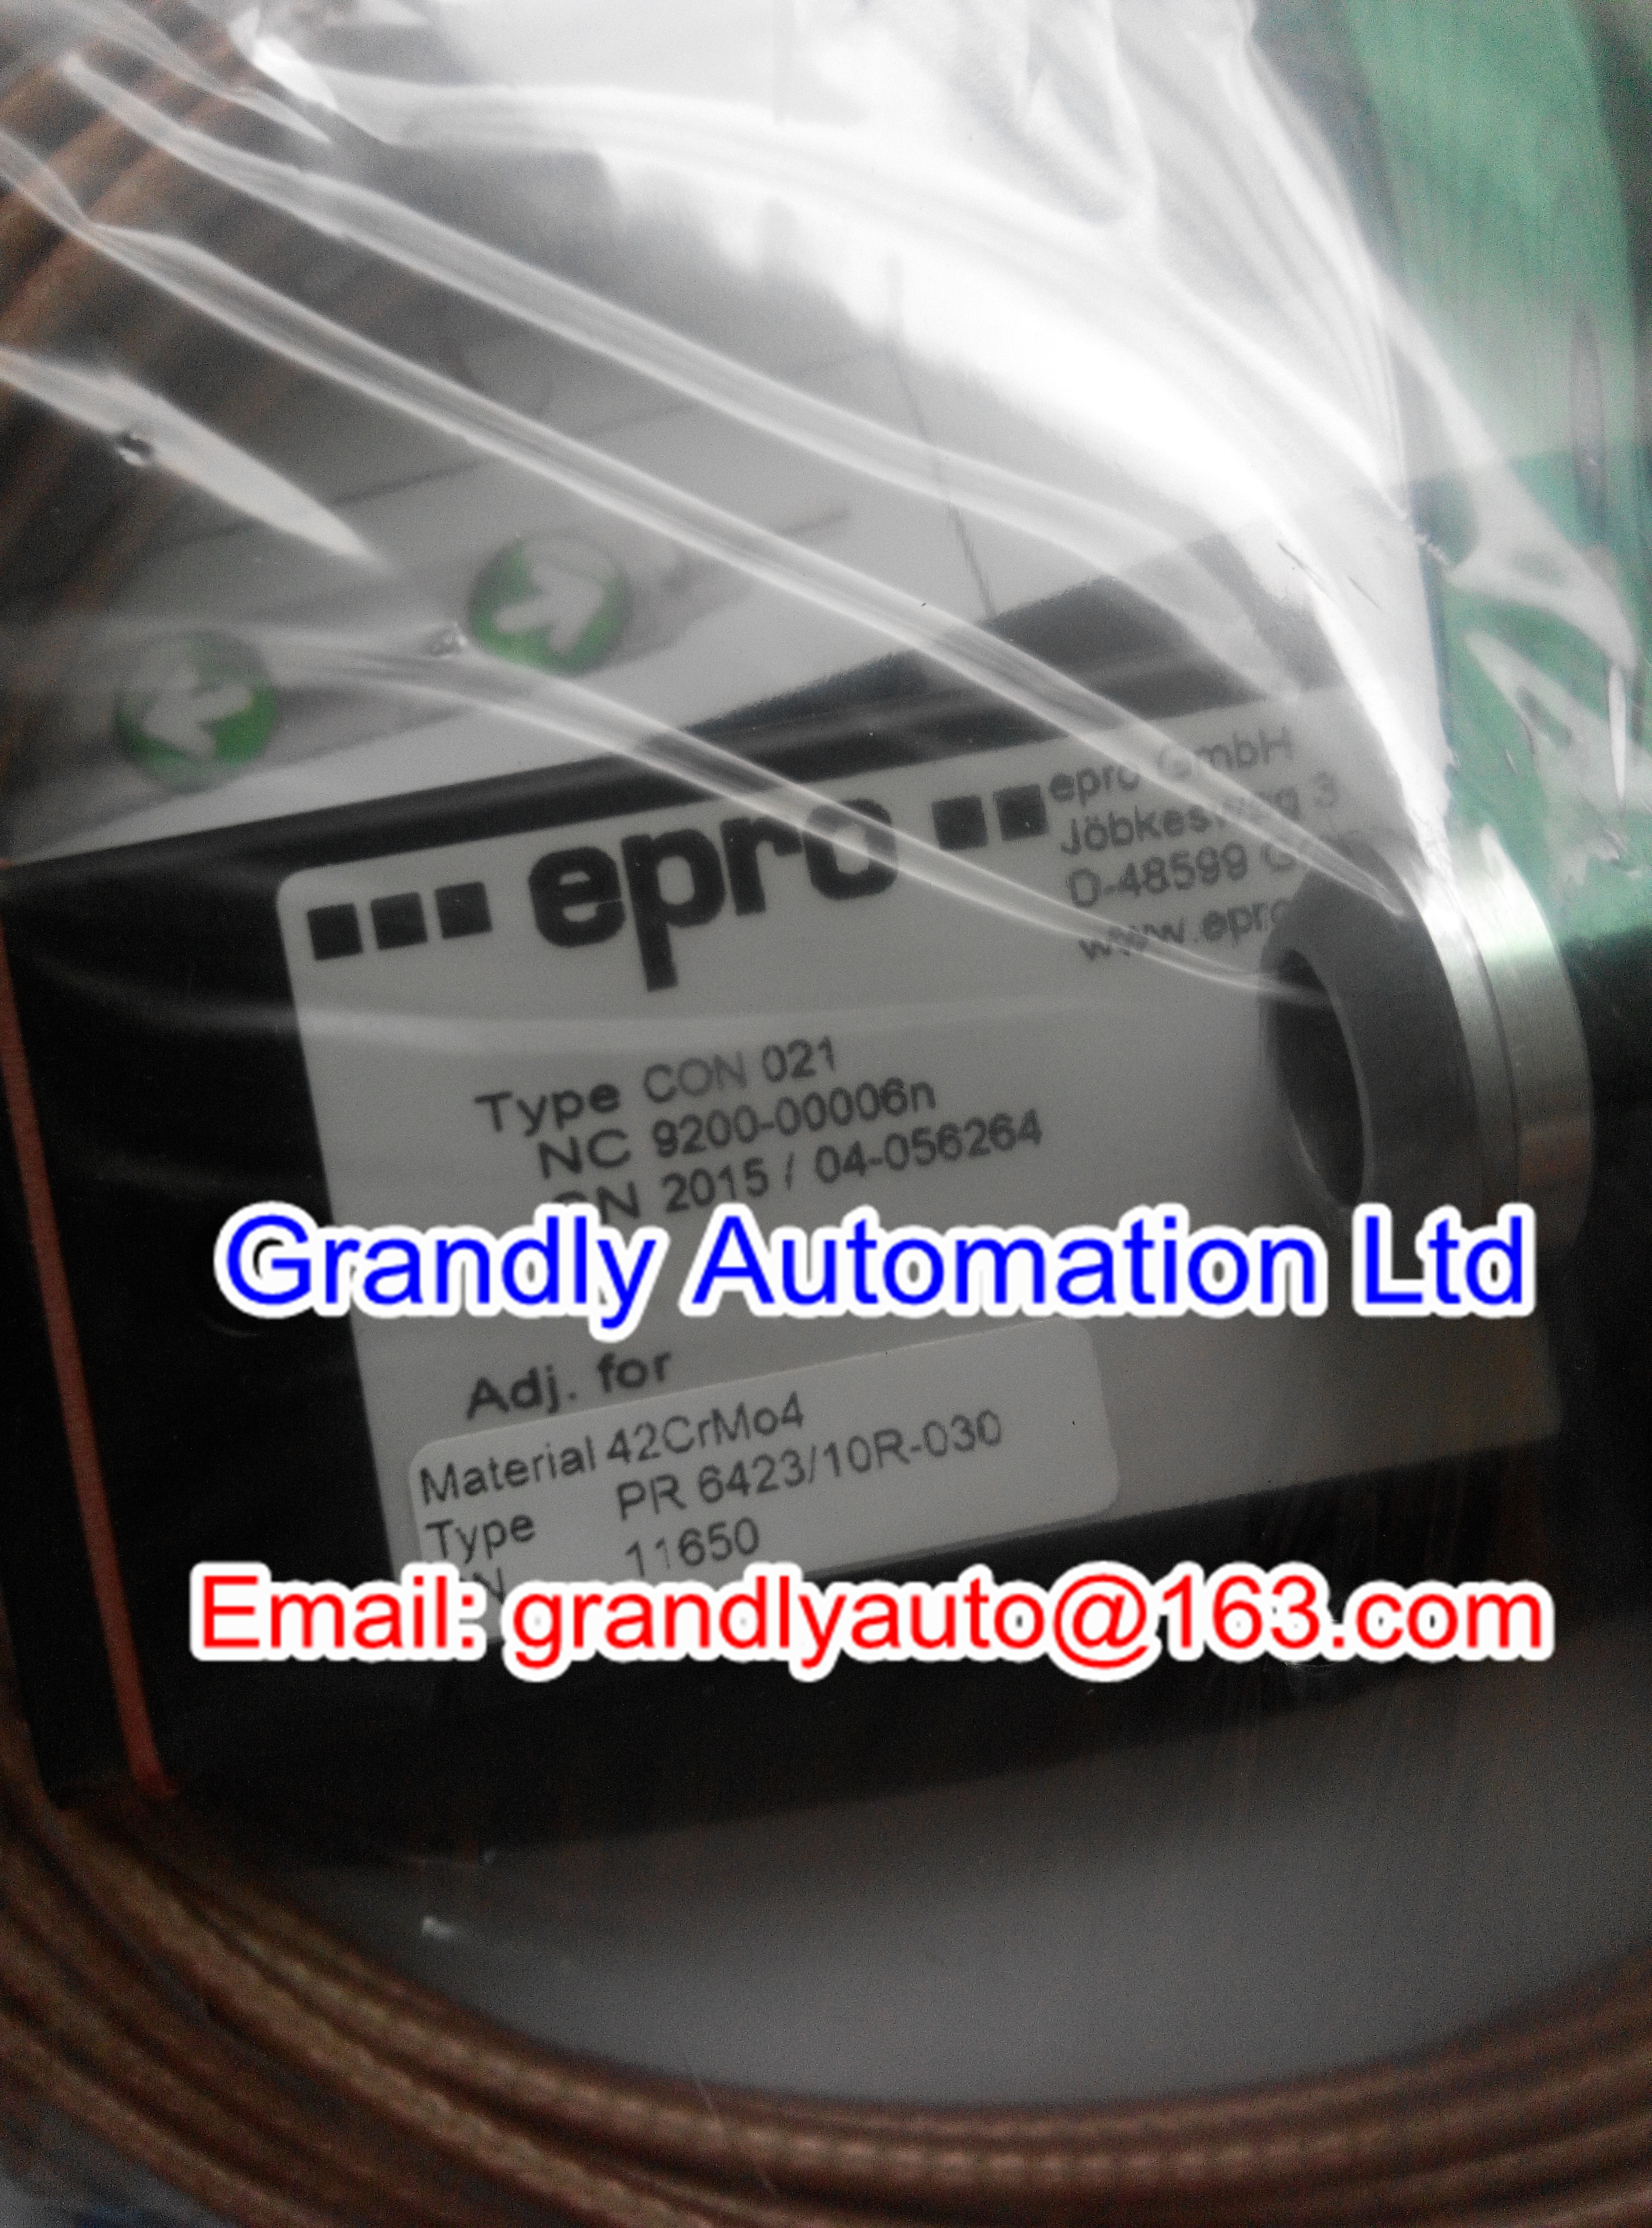 Quality New EPRO SDM 010 Monitor in stock-Buy at Grandly Automation Ltd